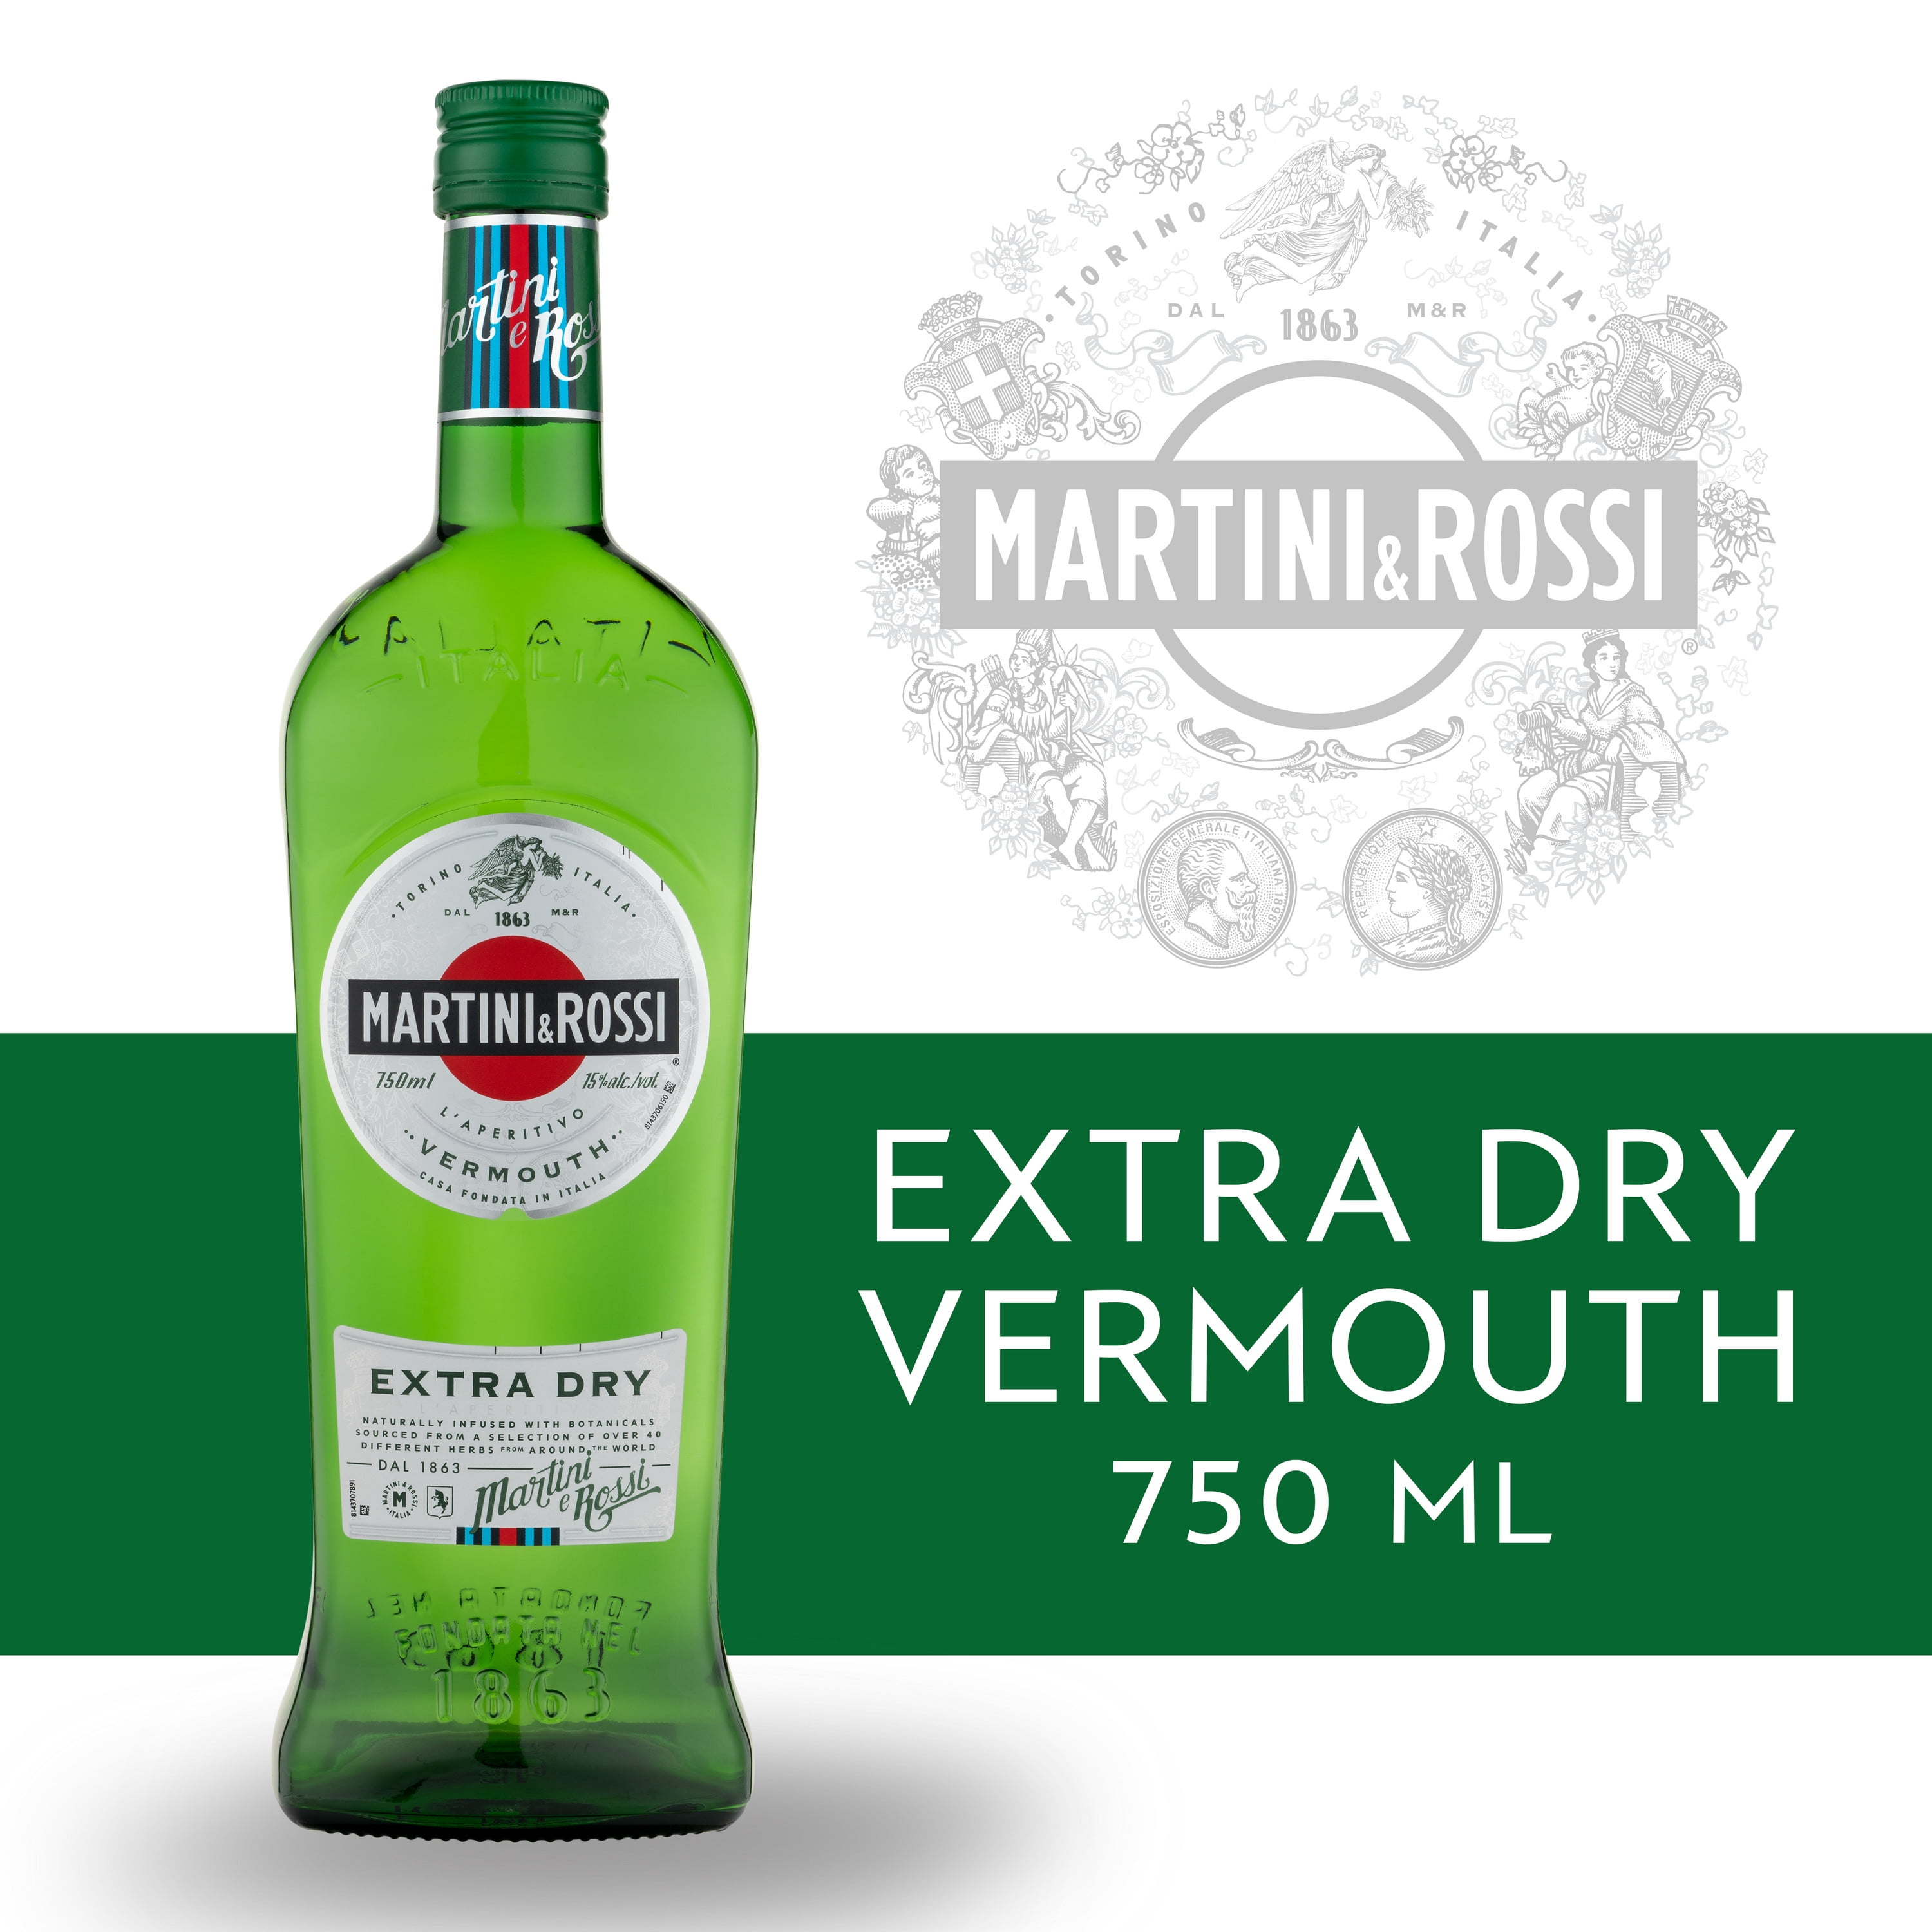 MARTINI & ROSSI Extra Dry 750 ABV Bottle, Mixer, mL Vermouth 15% Cocktail